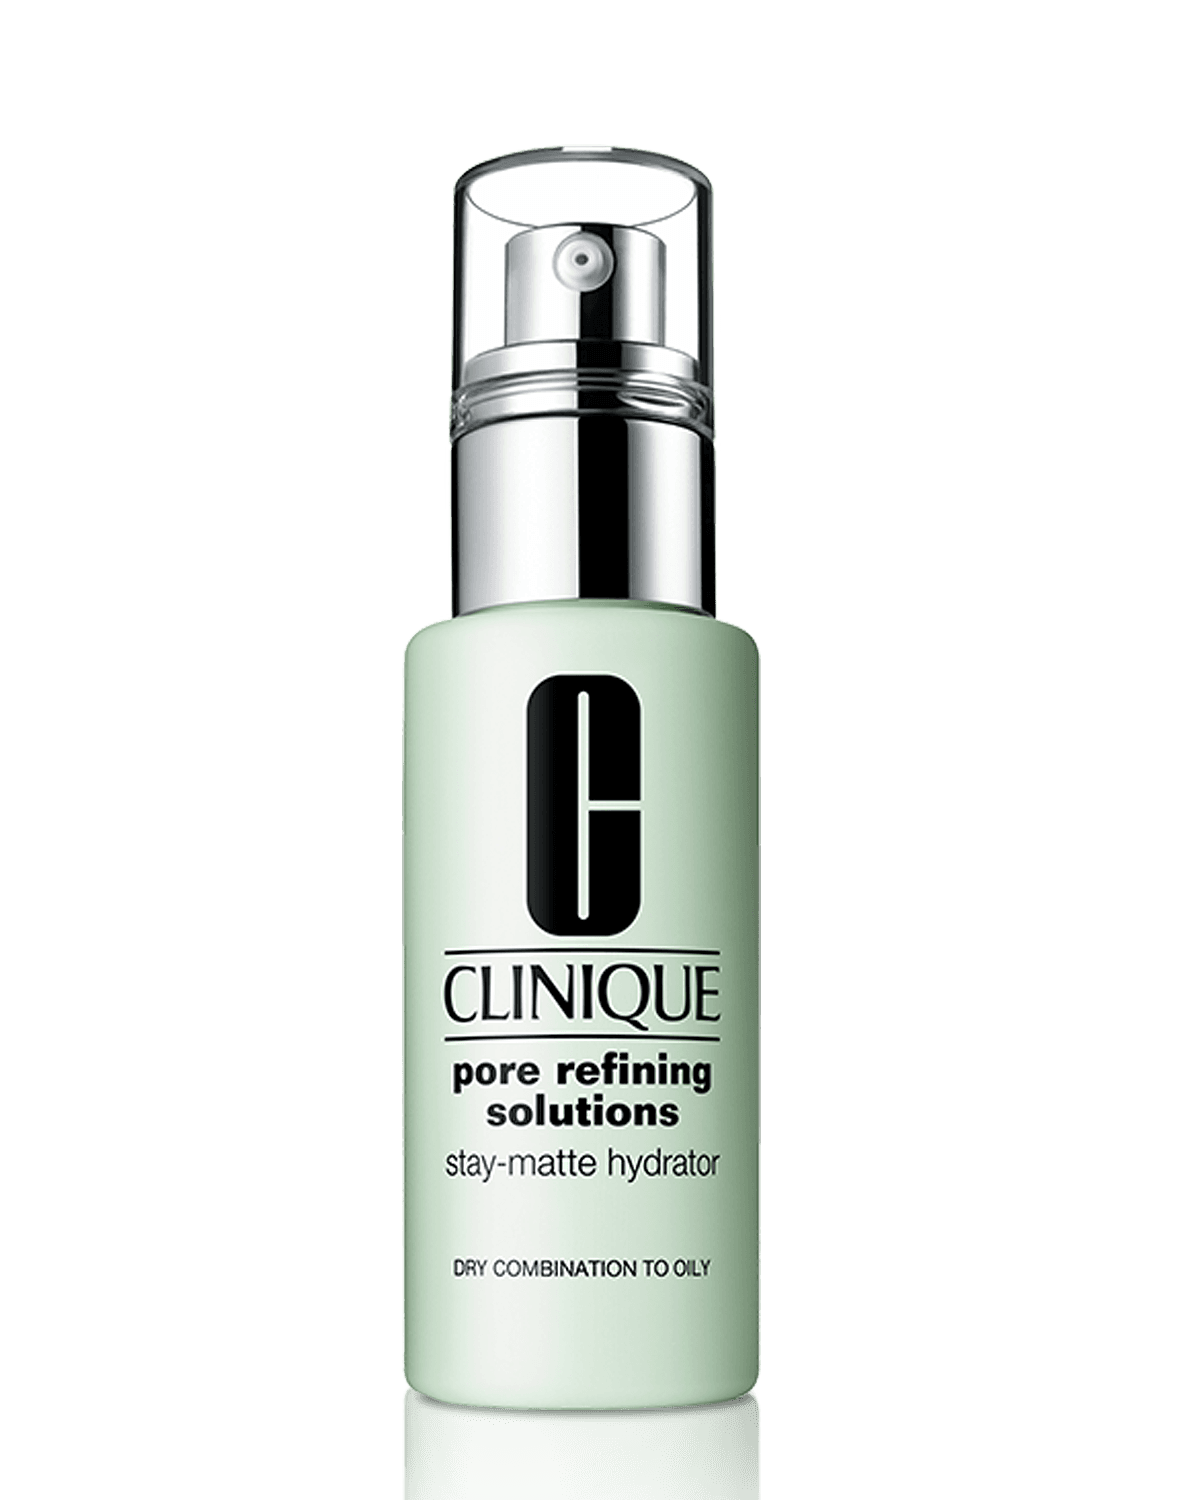 Pore Refining Solutions Stay-Matte Hydrator